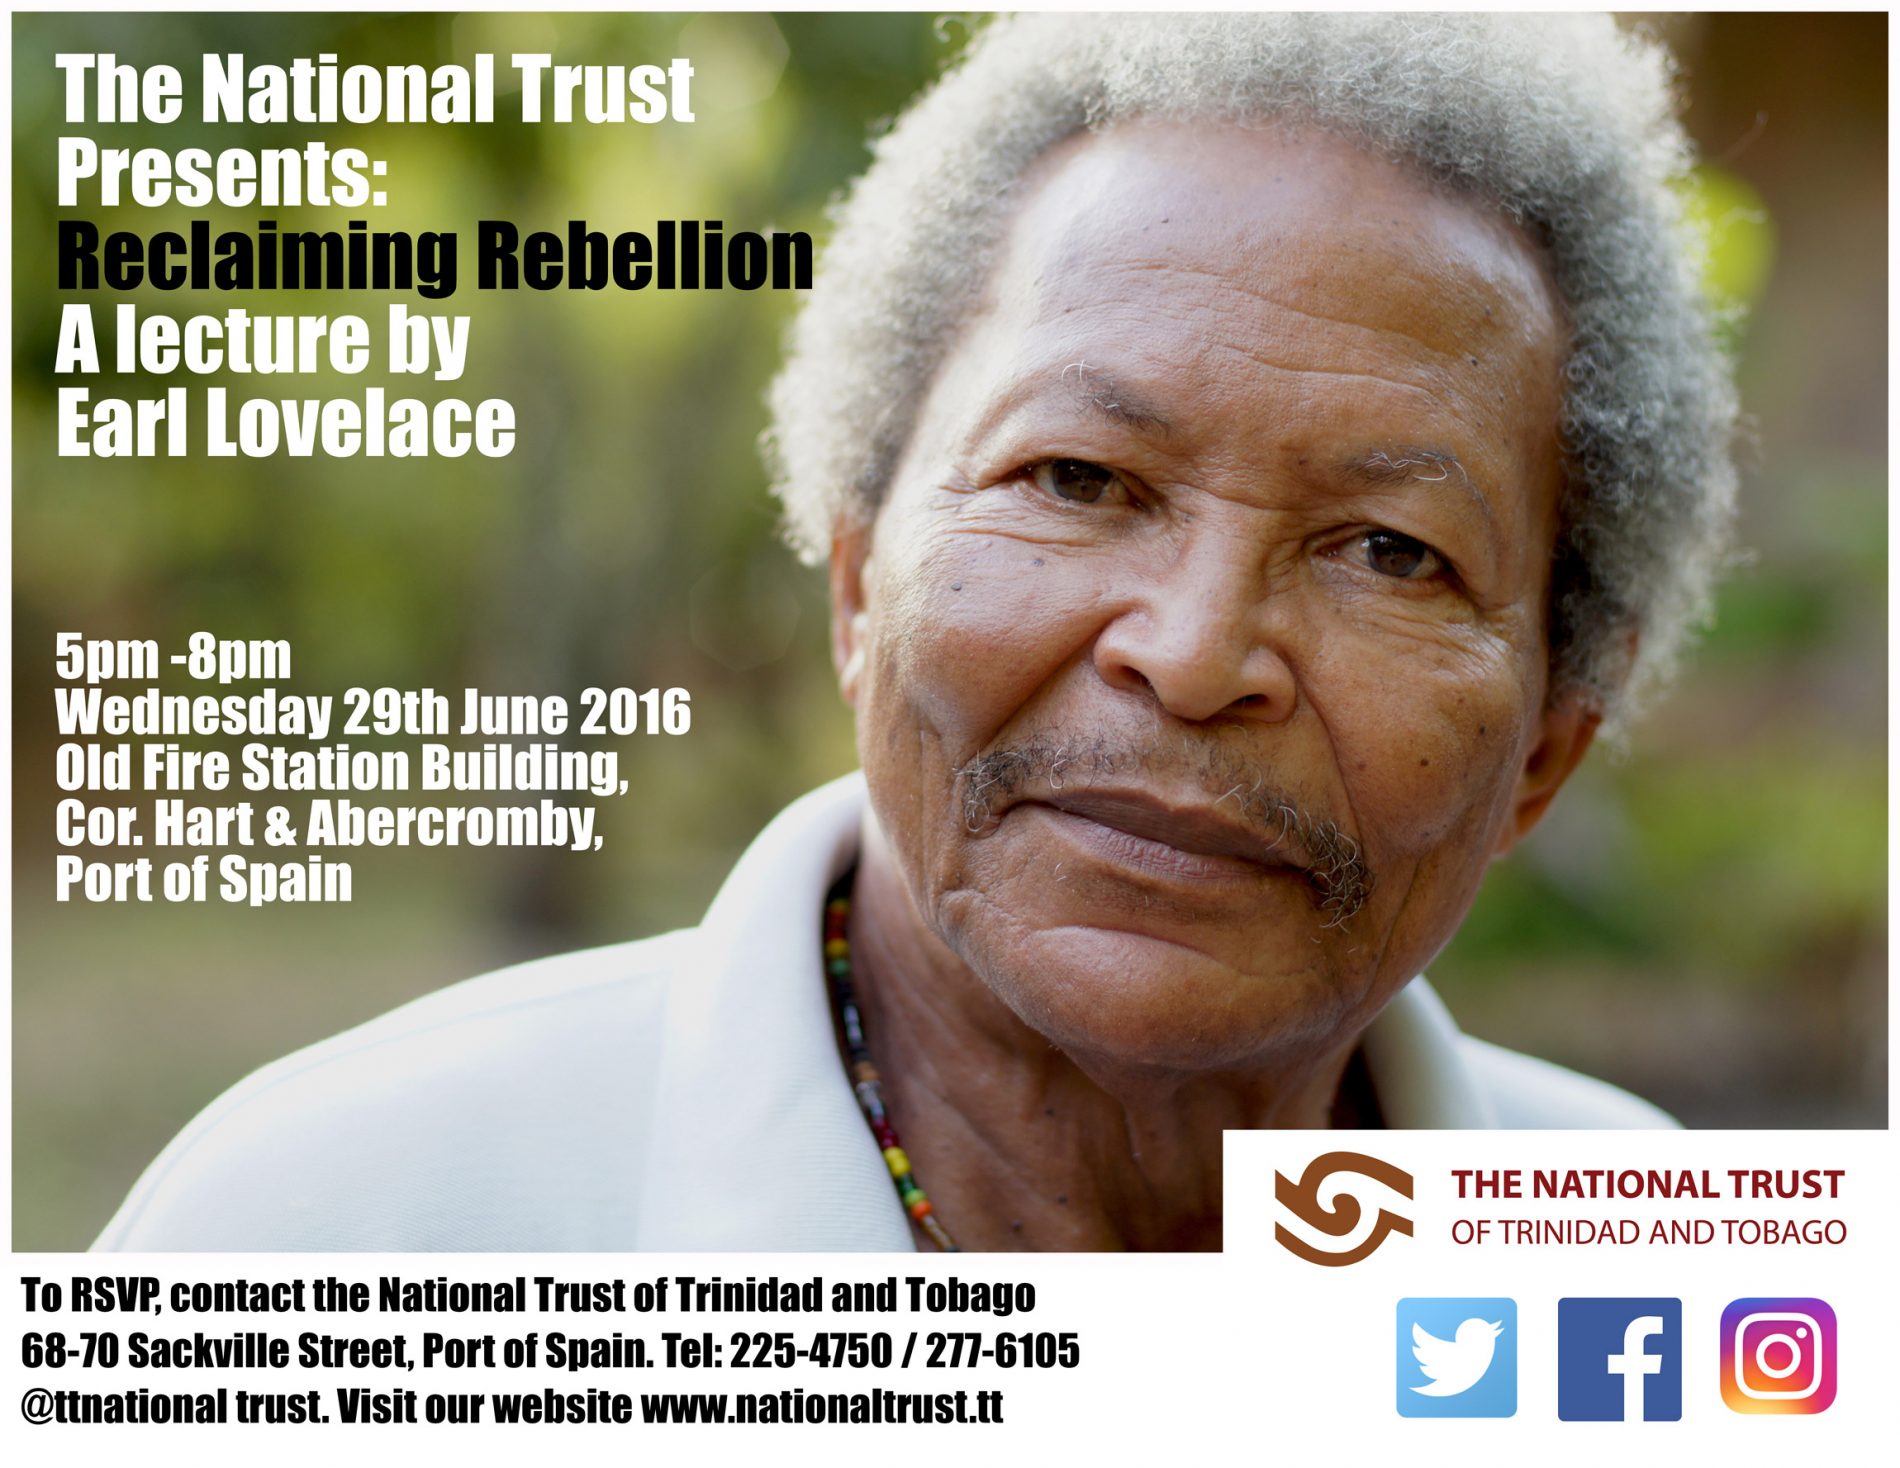 Reclaiming Rebellion - A lecture by Earl Lovelace on 29th June 2016